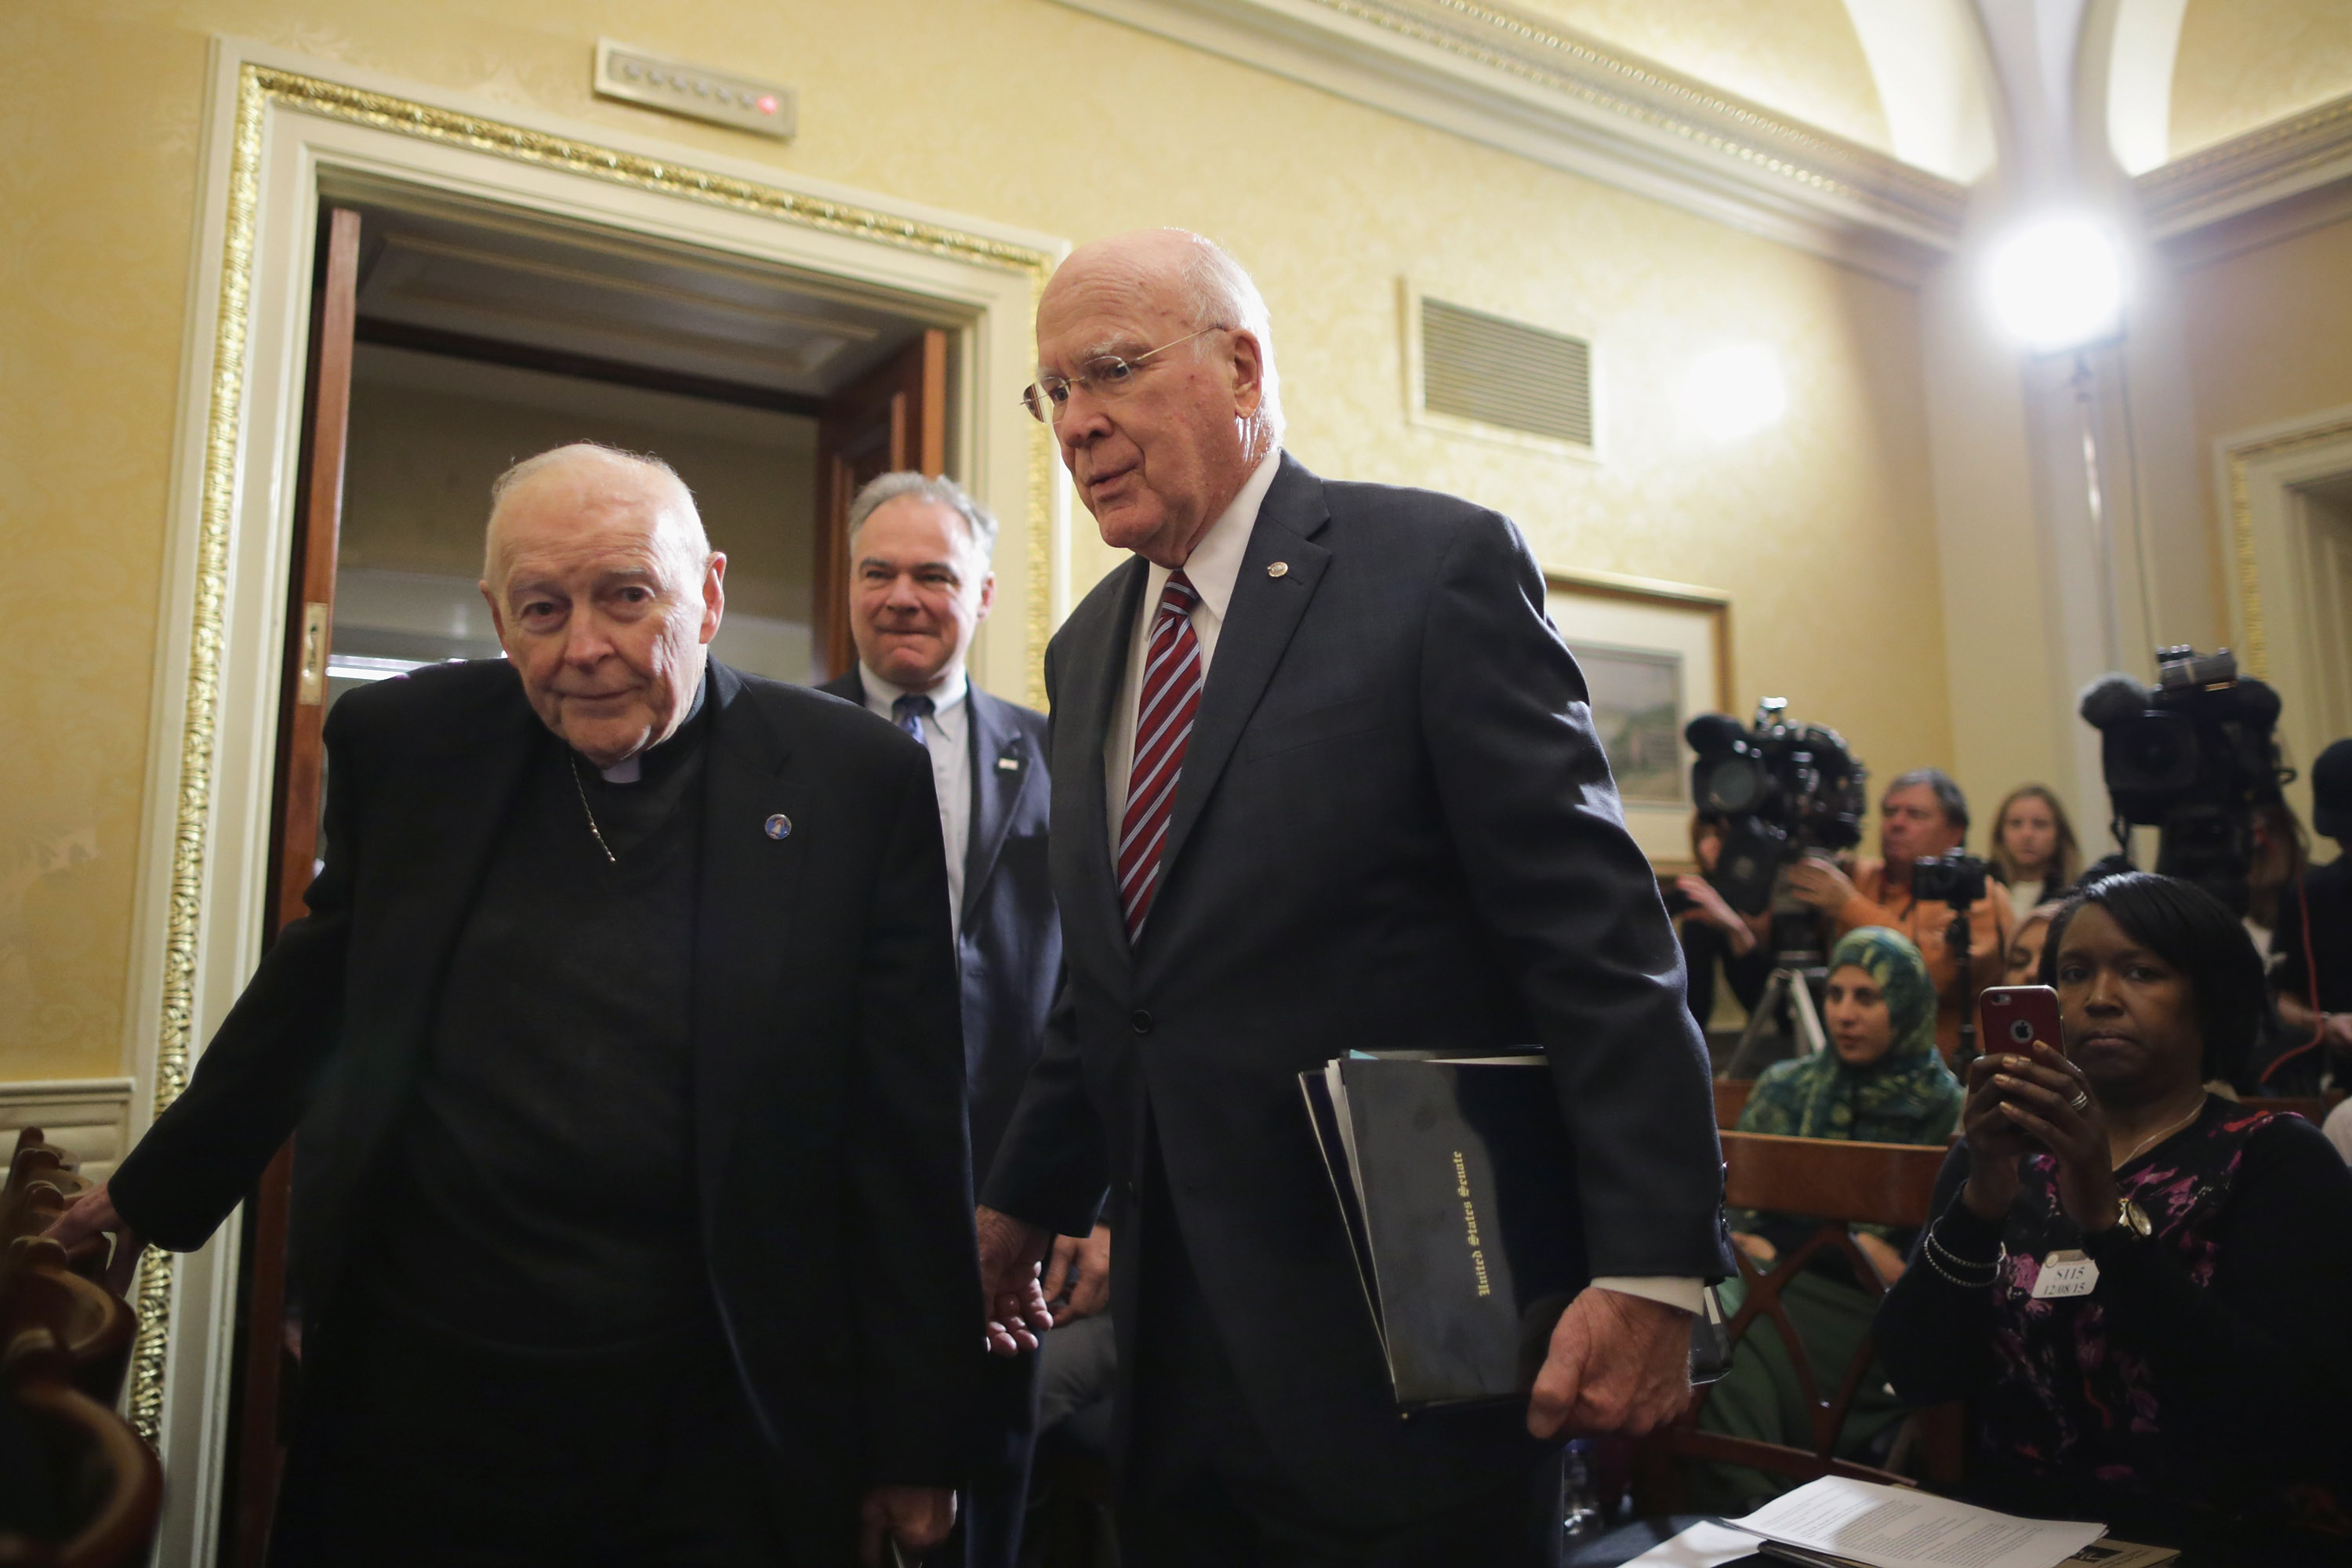 WASHINGTON, DC - DECEMBER 08: Sen. Patrick Leahy (D-VT) (R) and Cardinal Theodore McCarrick arrive for a news conference with national religious leaders to respond to attempts at vilifying refugees and call on lawmakers to engage in policymaking and not 'fear-mongering' at the U.S. Capitol December 8, 2015 in Washington, DC. (Photo by Chip Somodevilla/Getty Images)